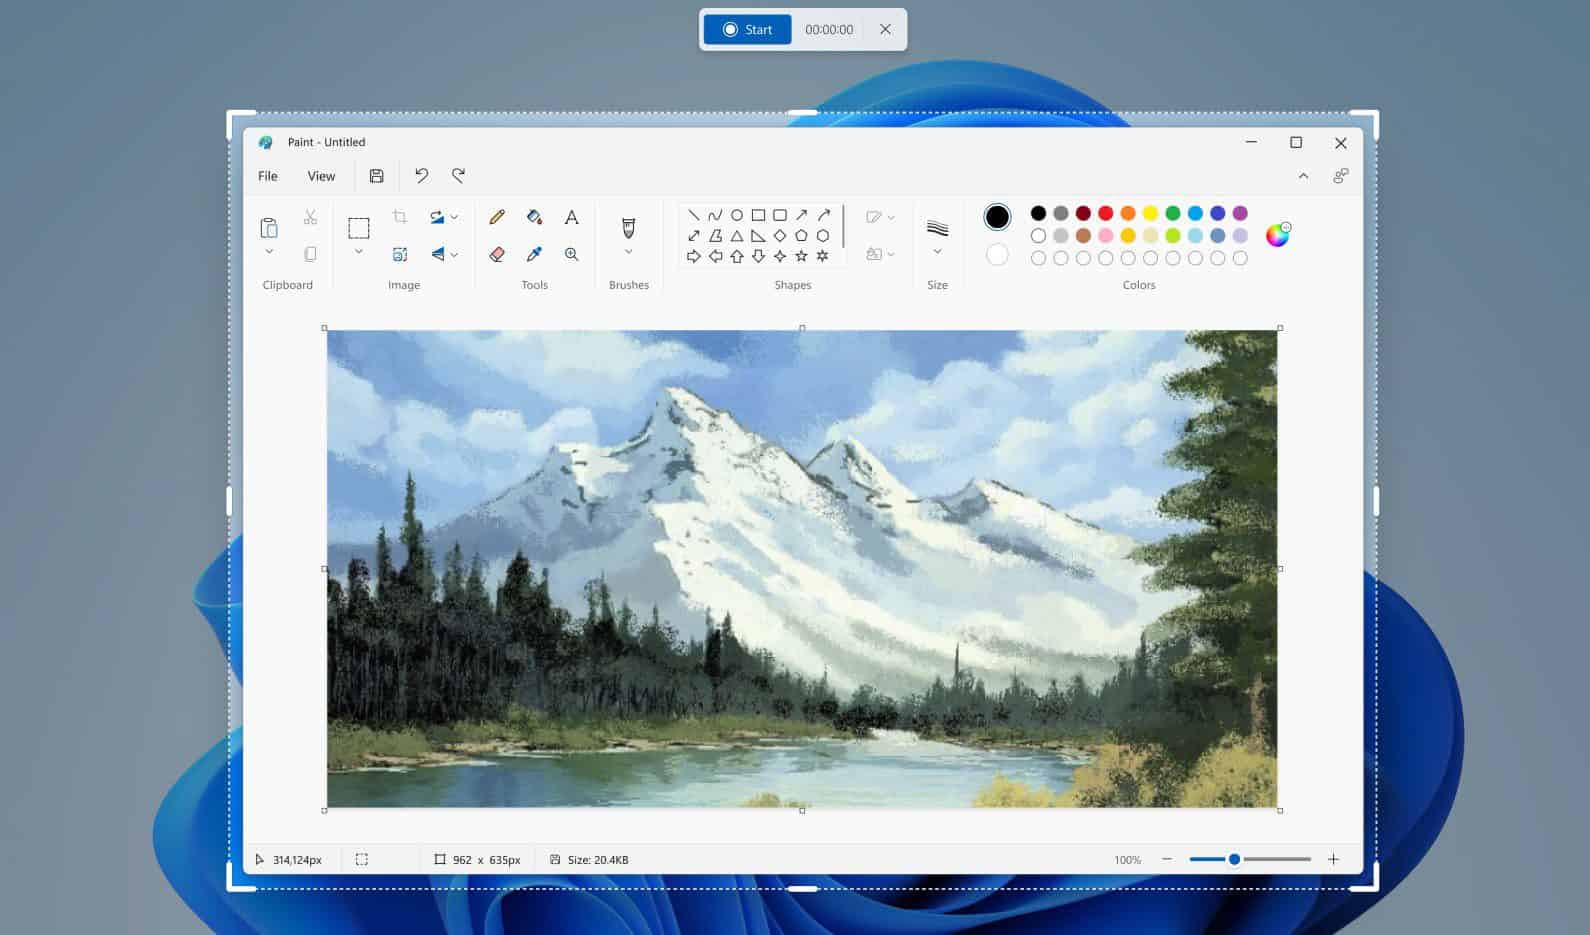 Screen Recording In Snipping Tool Starts Rolling Out To Windows 11 Insiders